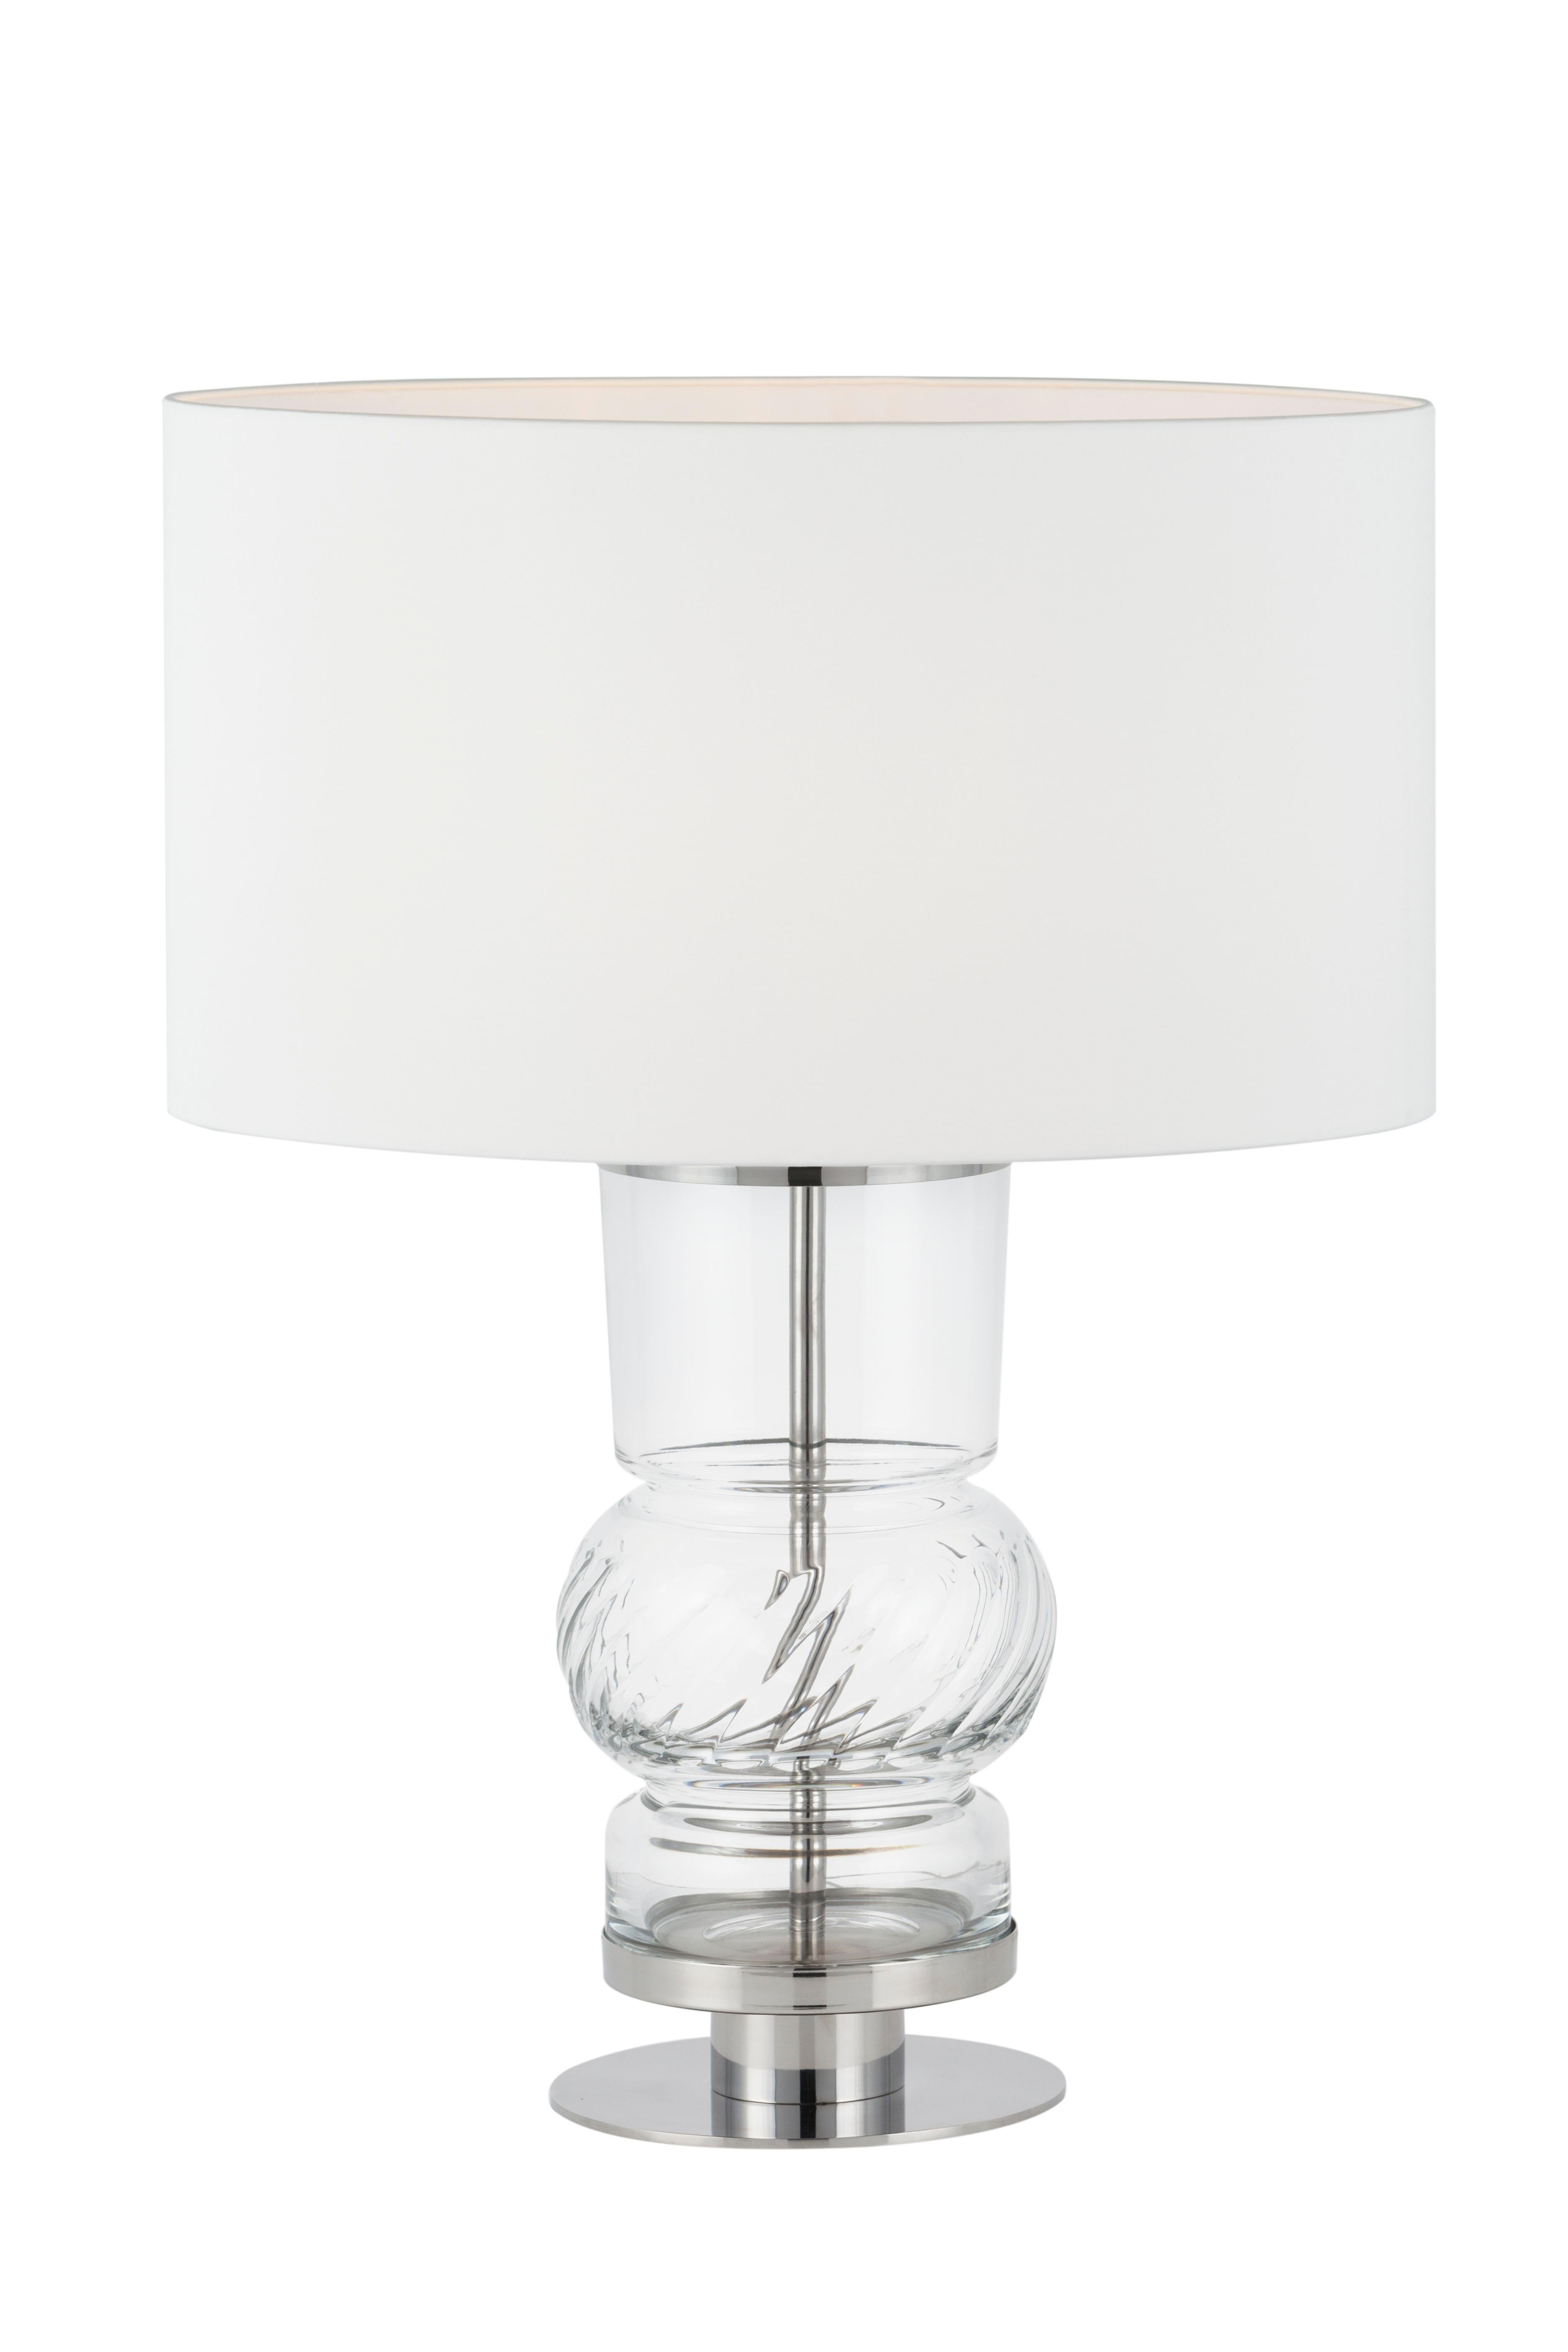 Portuguese Modern Vista Alegre Crystal Table Lamp Handmade in Portugal by Greenapple For Sale